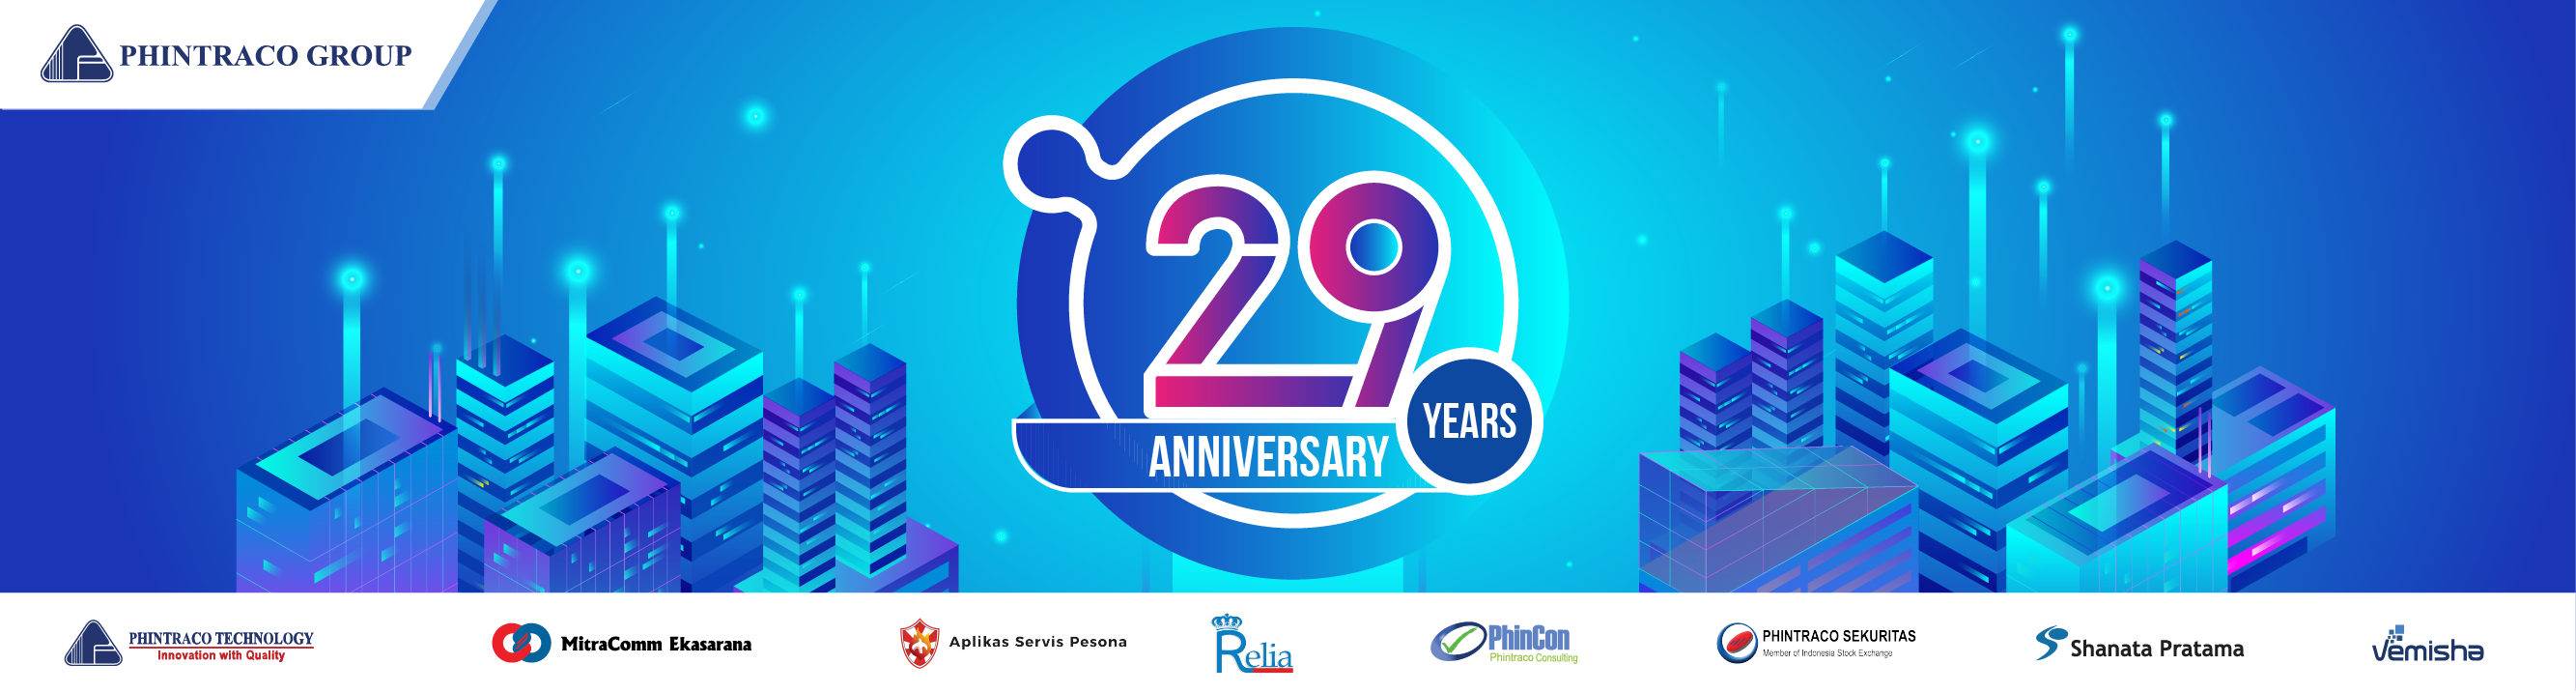 Happy 29th Anniversary, Phintraco Group!